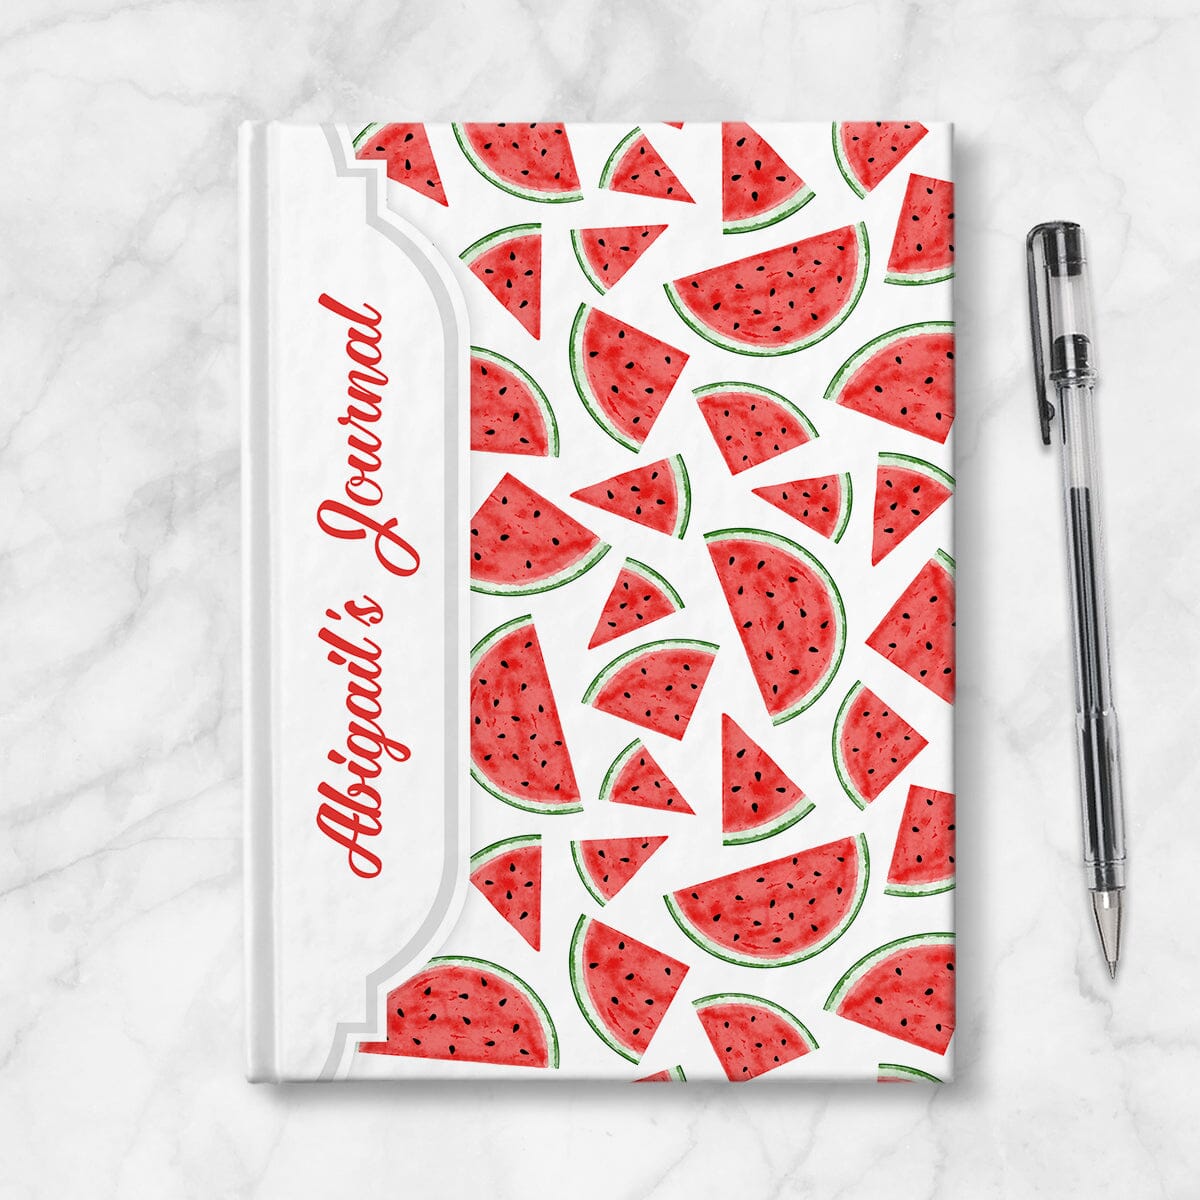 Personalized Watermelon Slices Journal at Artistically Invited. Image shows the book on a countertop next to a pen.